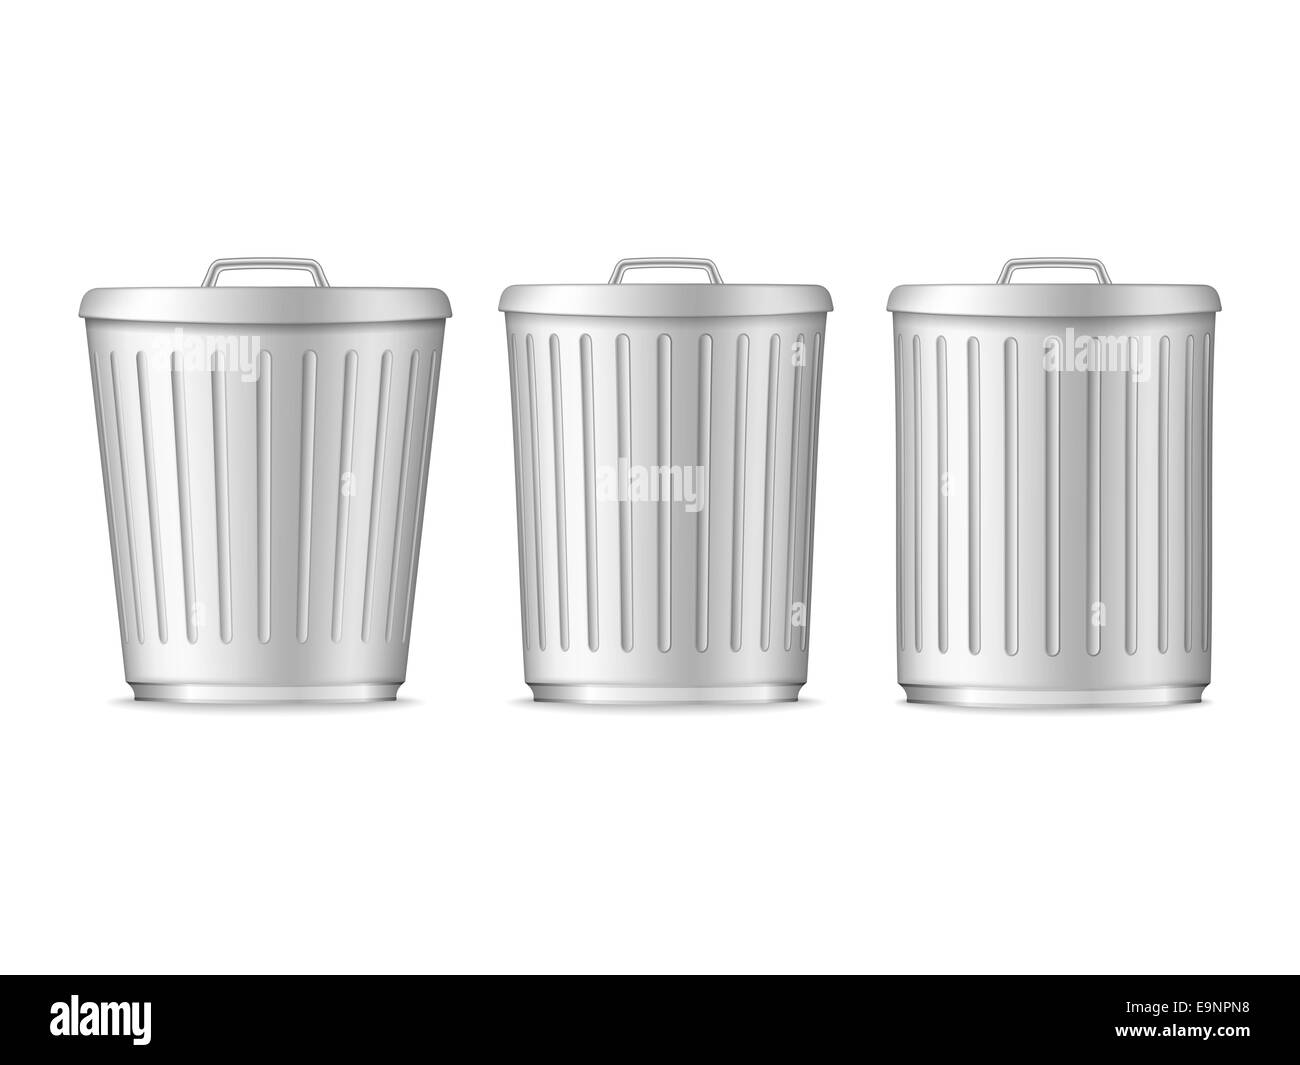 Different trash cans Stock Photo